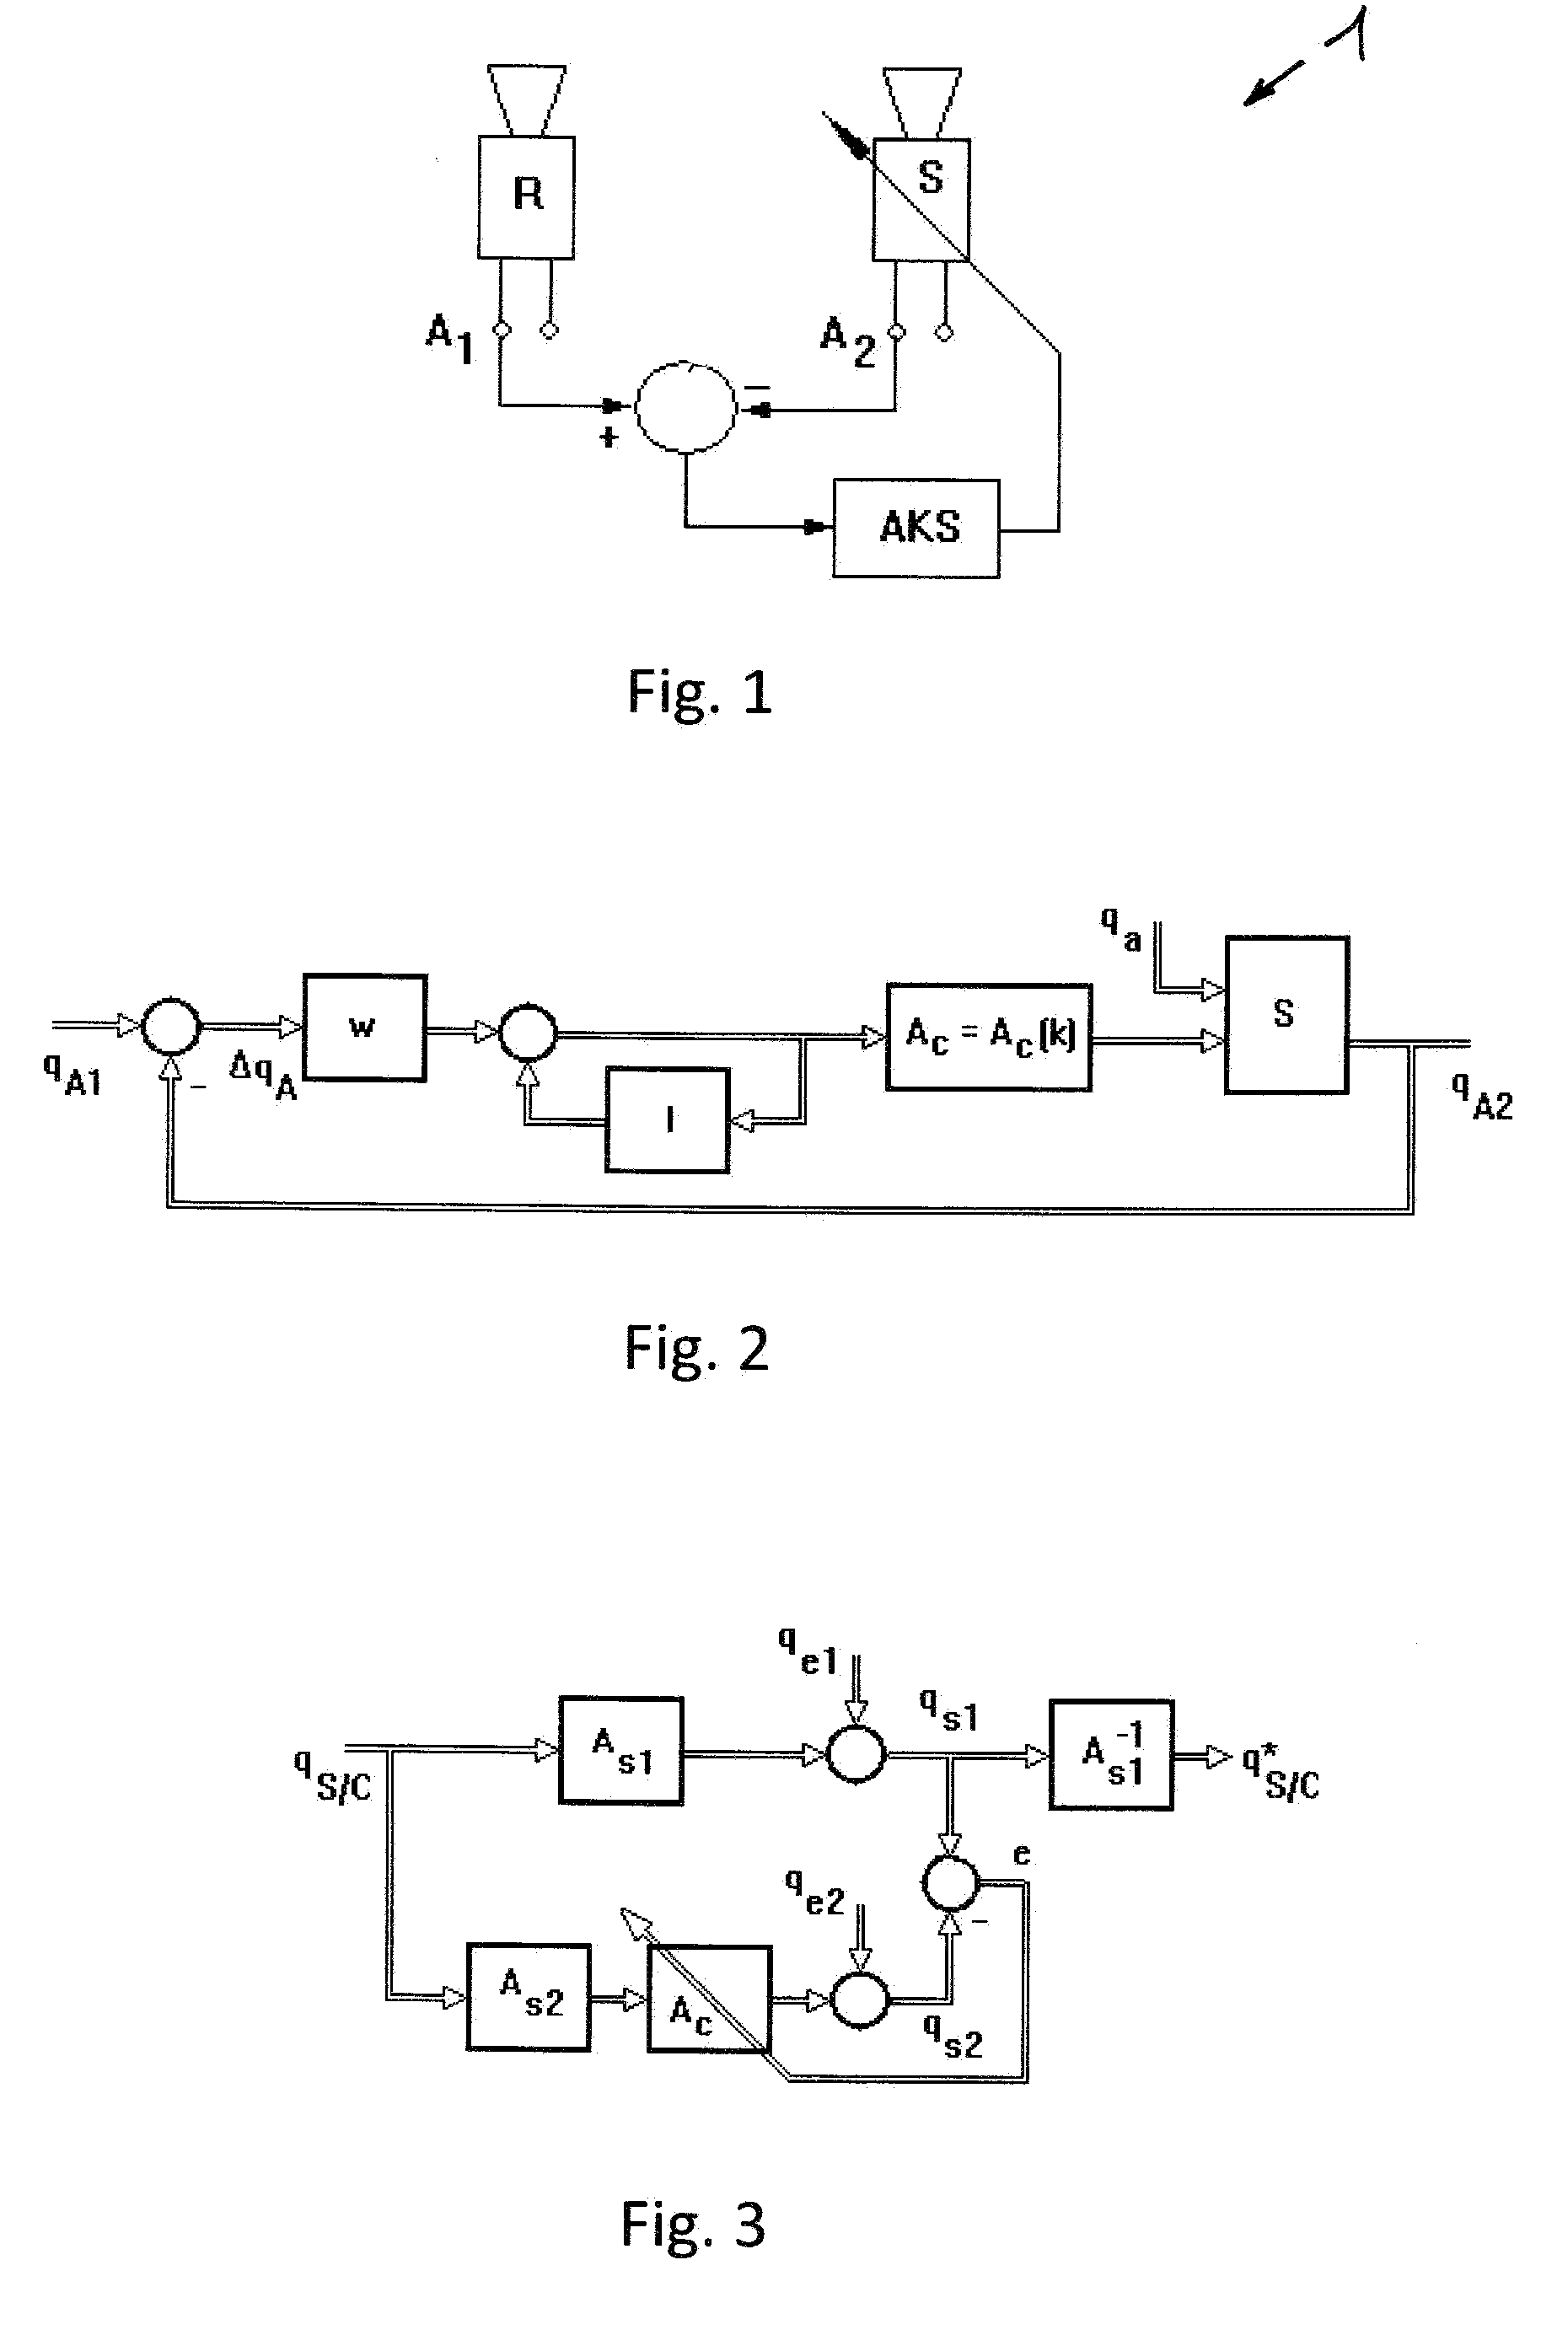 Method for the automatic correction of alignment errors in star tracker systems